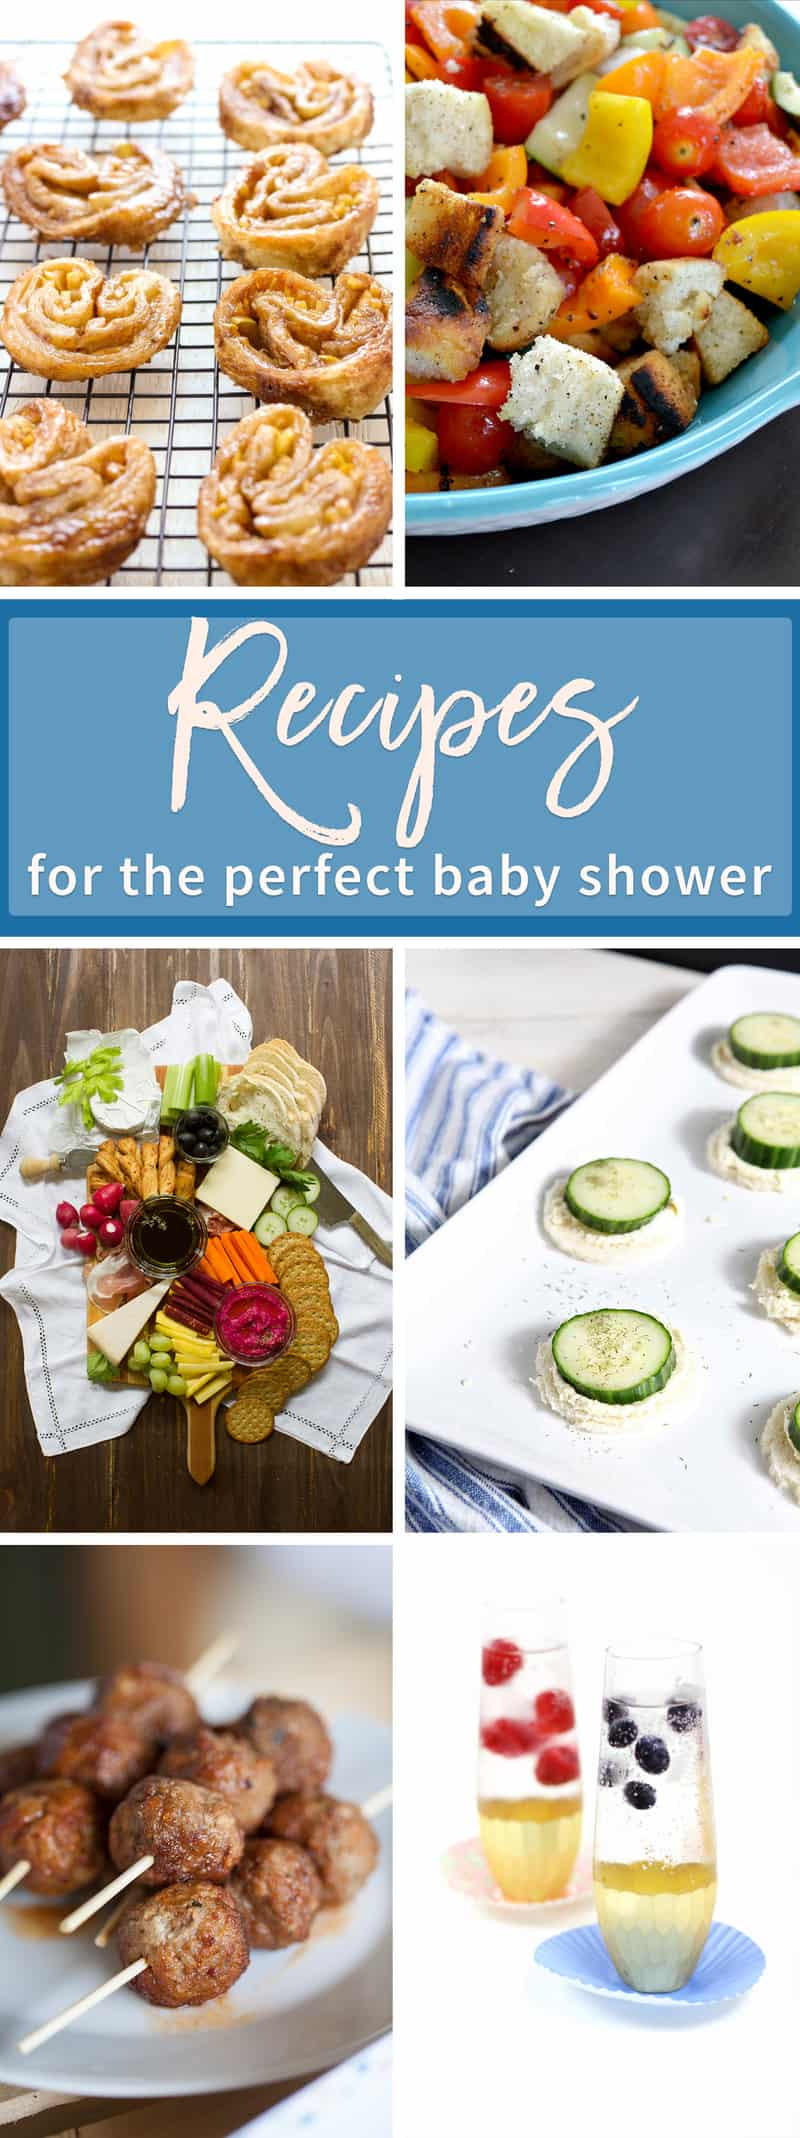 Recipes For Baby Showers
 Lemon Blueberry Whoopie Pies Recipe Beer Girl Cooks